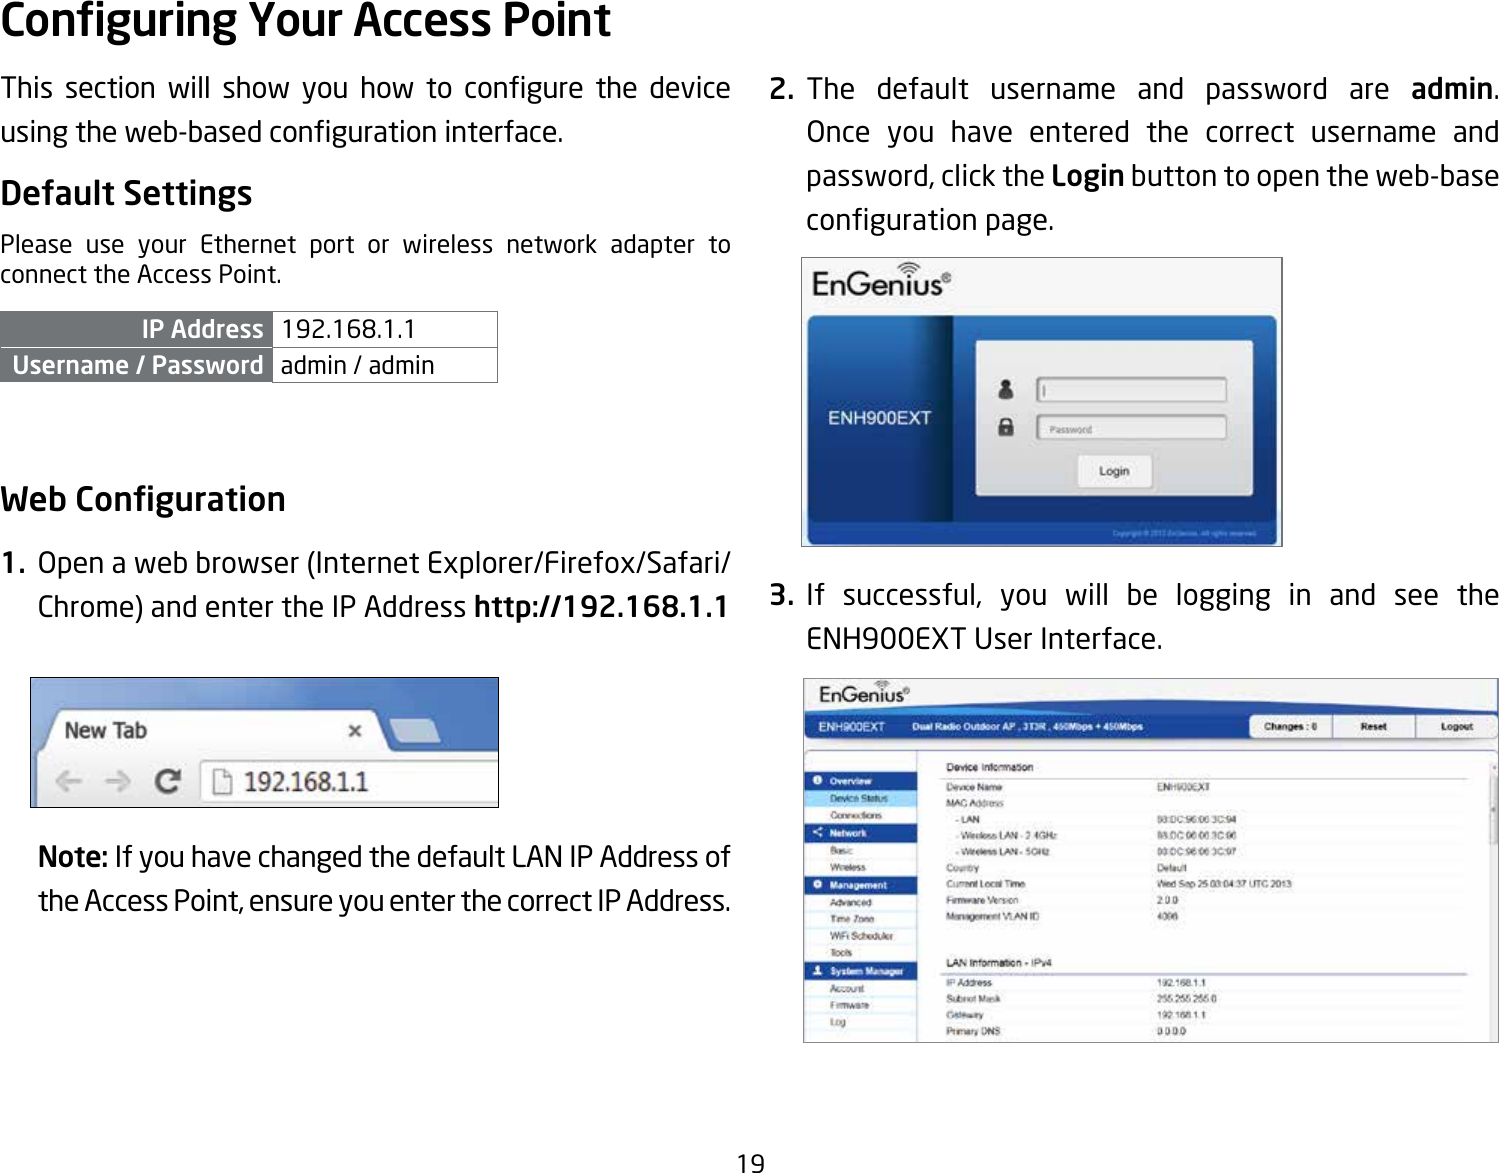 19This section will show you how to congure the deviceusingtheweb-basedcongurationinterface.Default SettingsPlease use your Ethernet port or wireless network adapter to connect the Access Point.IP Address 192.168.1.1Username / Password admin / admin Web Conguration1.  Openawebbrowser(InternetExplorer/Firefox/Safari/Chrome) and enter the IP Address http://192.168.1.1Note: If you have changed the default LAN IP Address of the Access Point, ensure you enter the correct IP Address.2. The default username and password are admin. Once you have entered the correct username andpassword, click the Login button to open the web-base congurationpage.3. If successful, you will be logging in and see the ENH900EXTUserInterface.Conguring Your Access Point